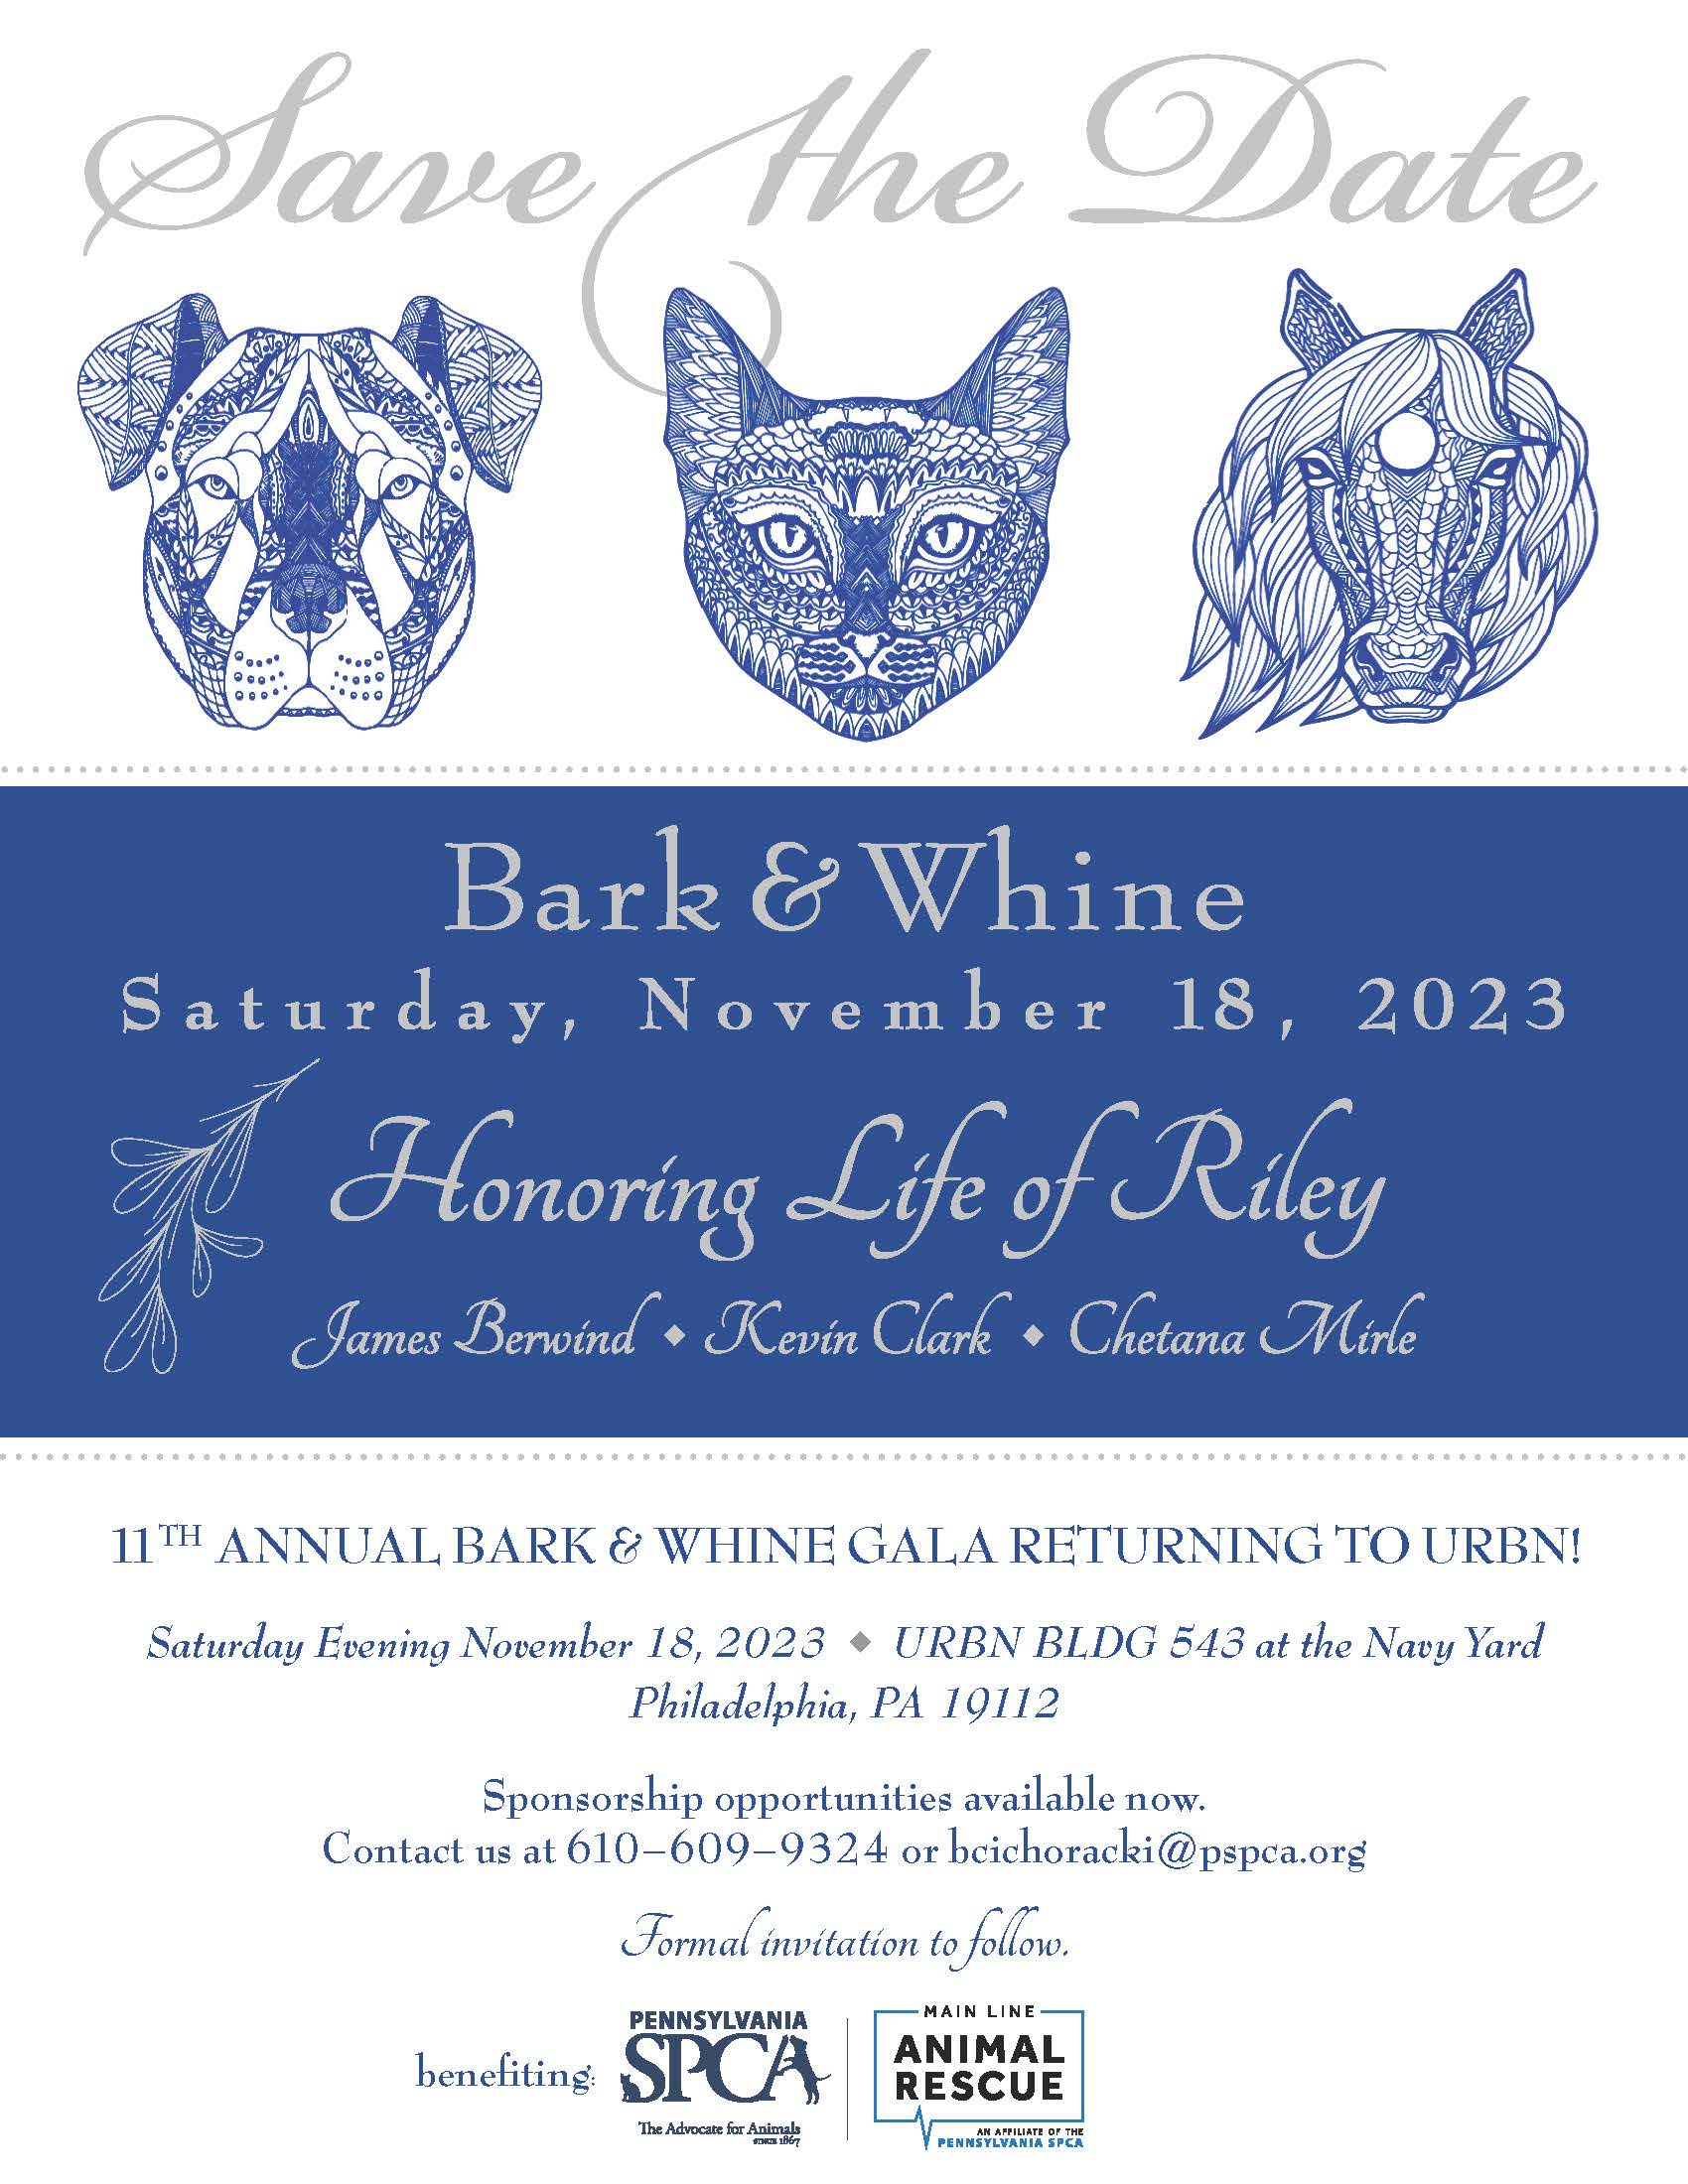 Save the Date! Bark & Whine 2023! Pennsylvania Society for the